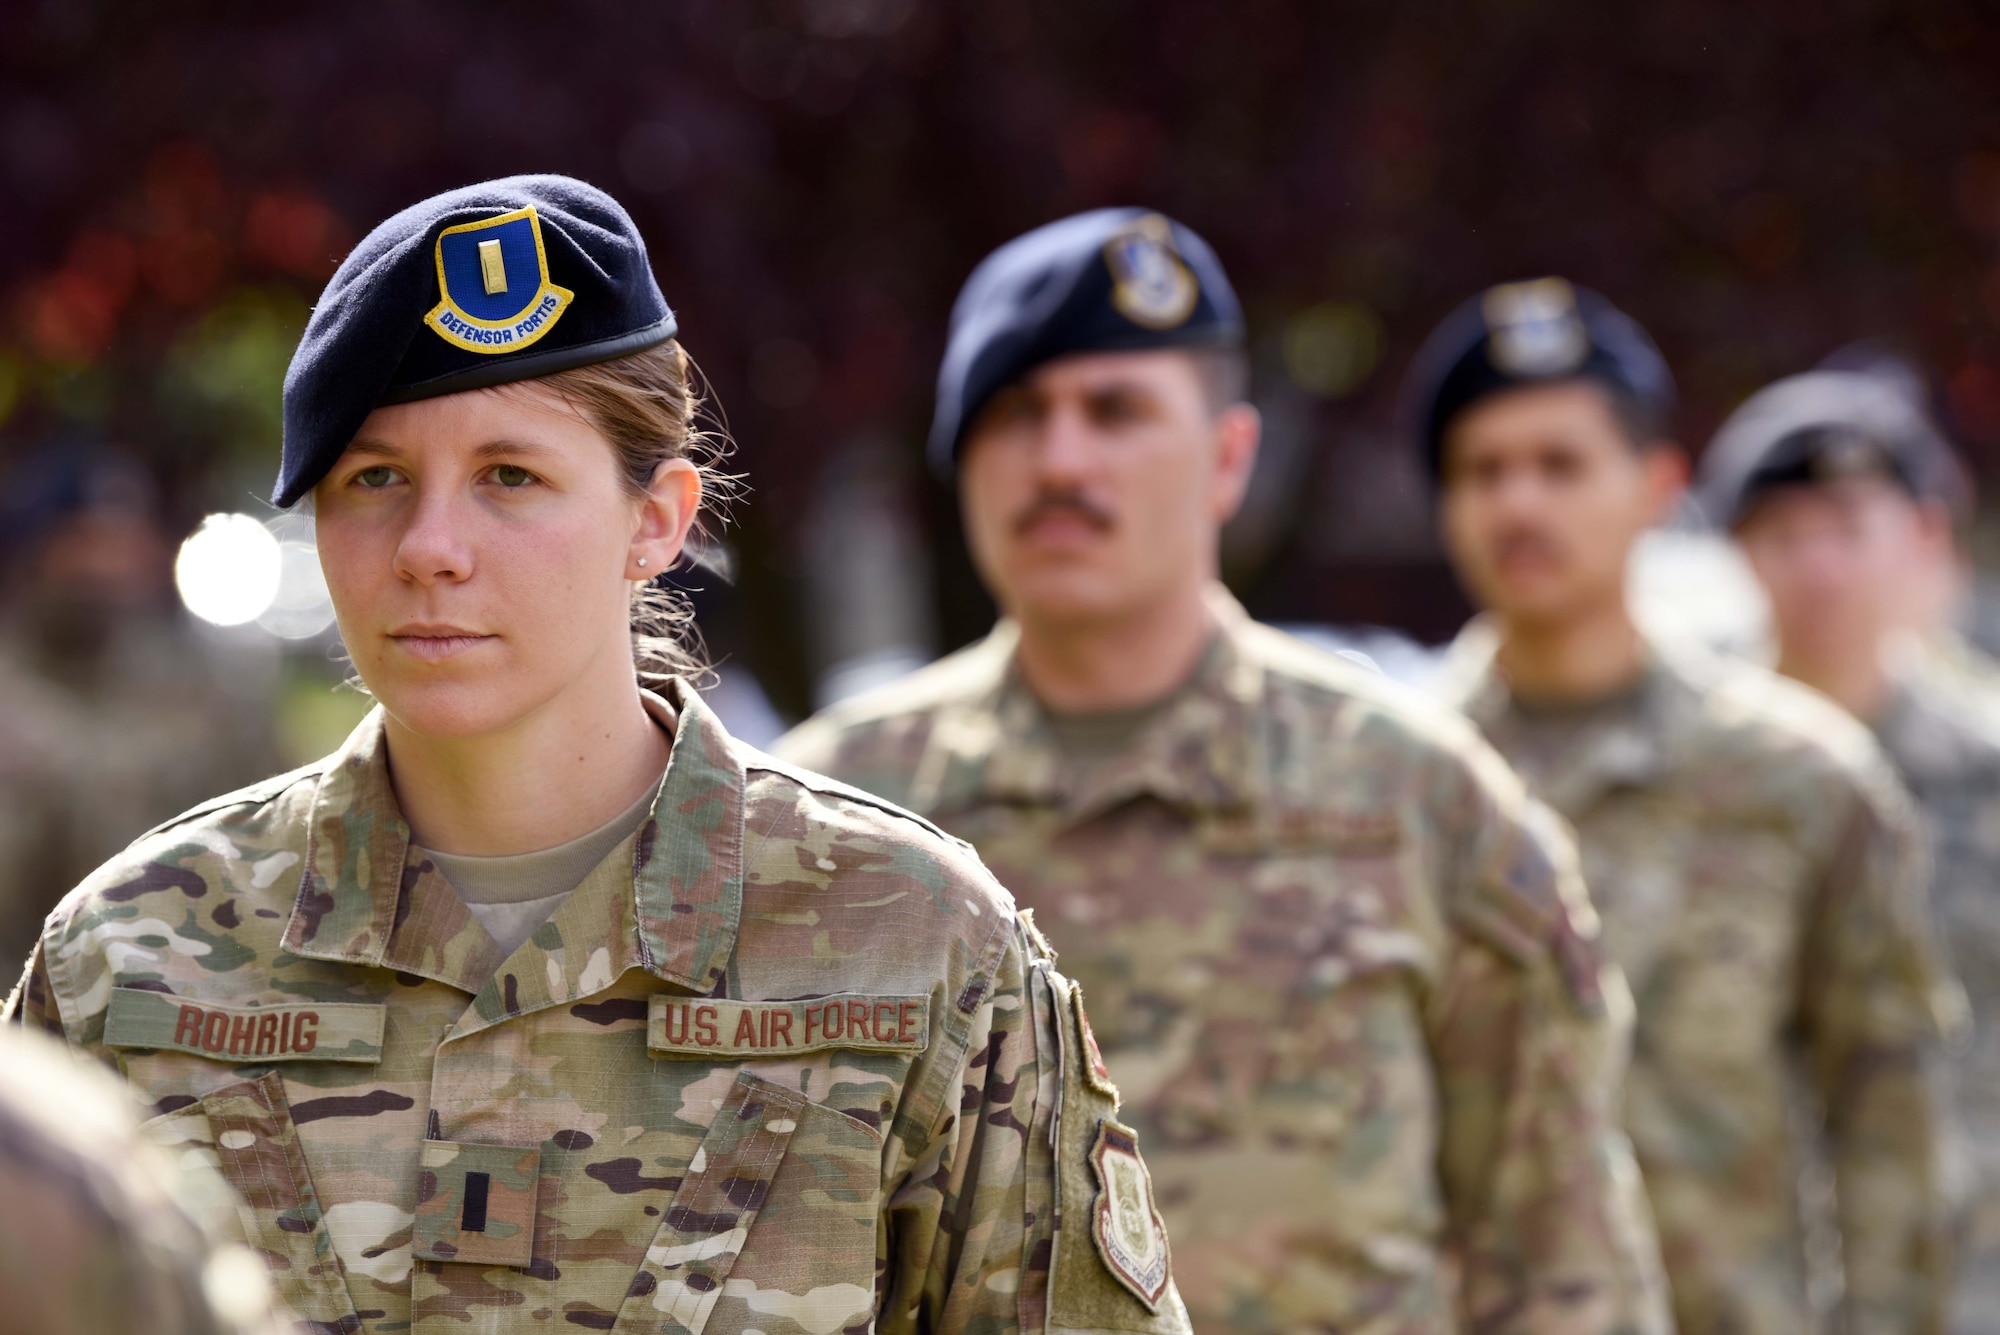 First Lieutenant Jessica Rohrig, 100th Security Forces Squadron operations officer, stands at attention during the 100th SFS Police Week closing ceremony at RAF Mildenhall, England, May 15, 2020. National Police Week is an observance in the United States which pays tribute to local, state and federal officers who’ve died or who’ve been disabled in the line of duty. (U.S. Air Force photo by Senior Airman Brandon Esau)